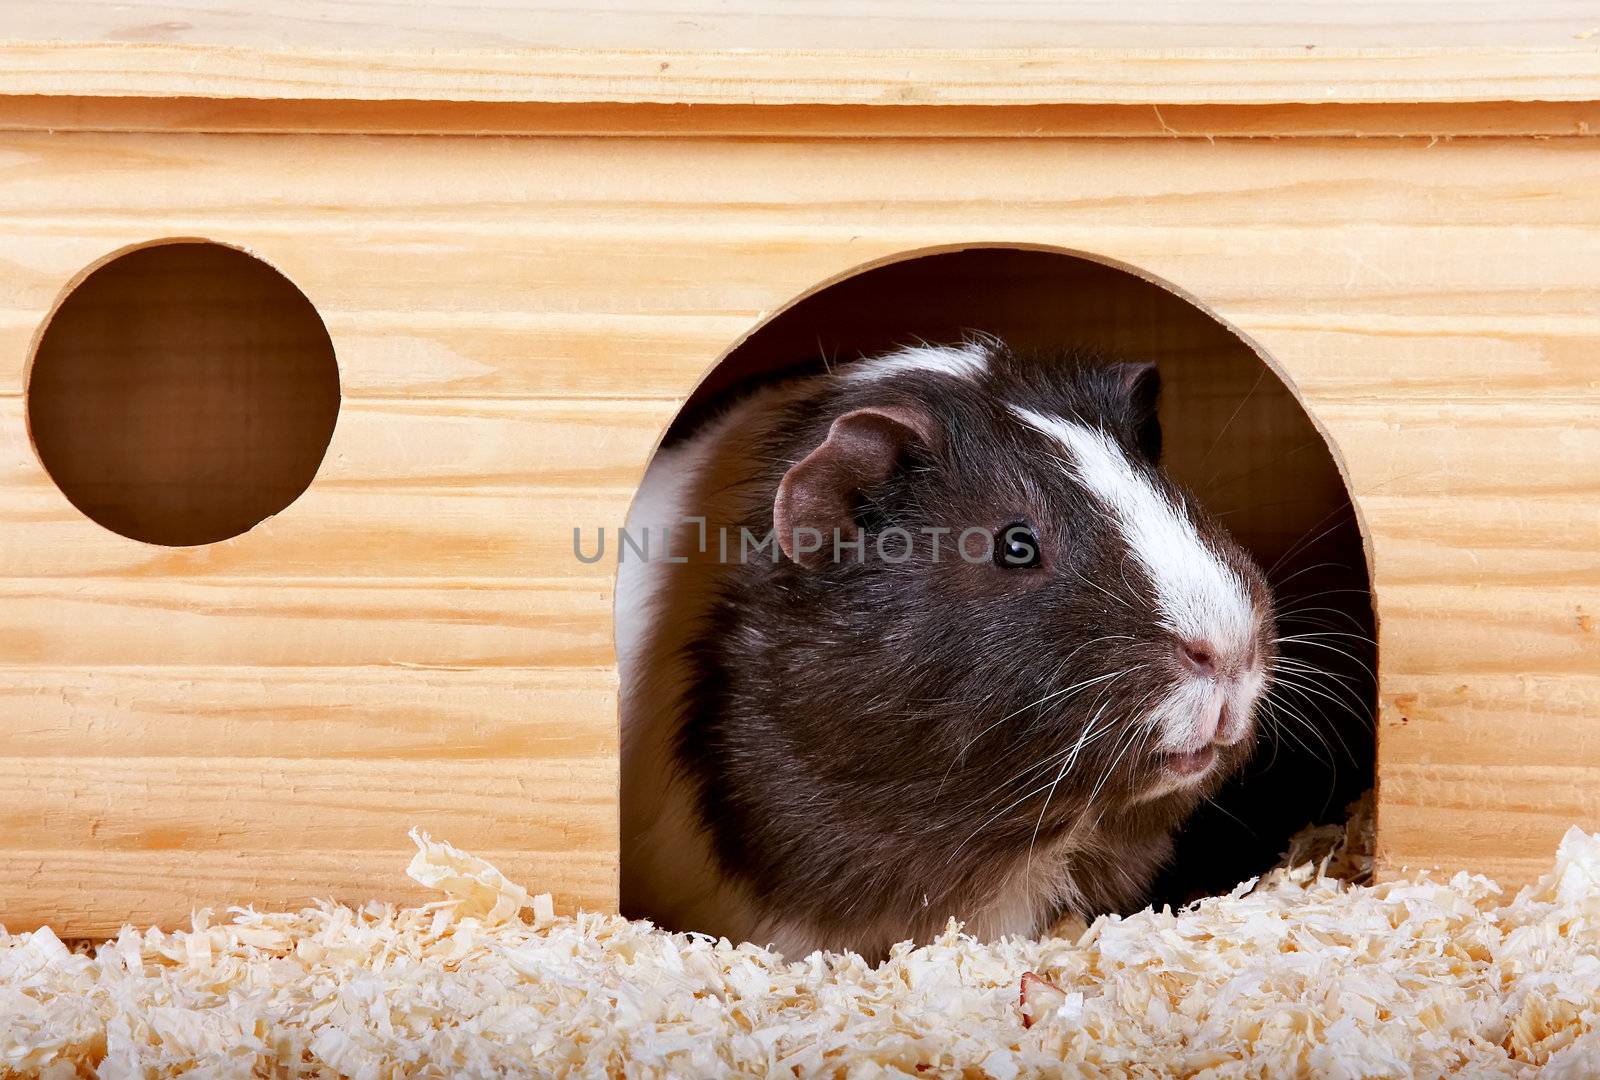 Guinea pigs in a wooden small house on sawdust